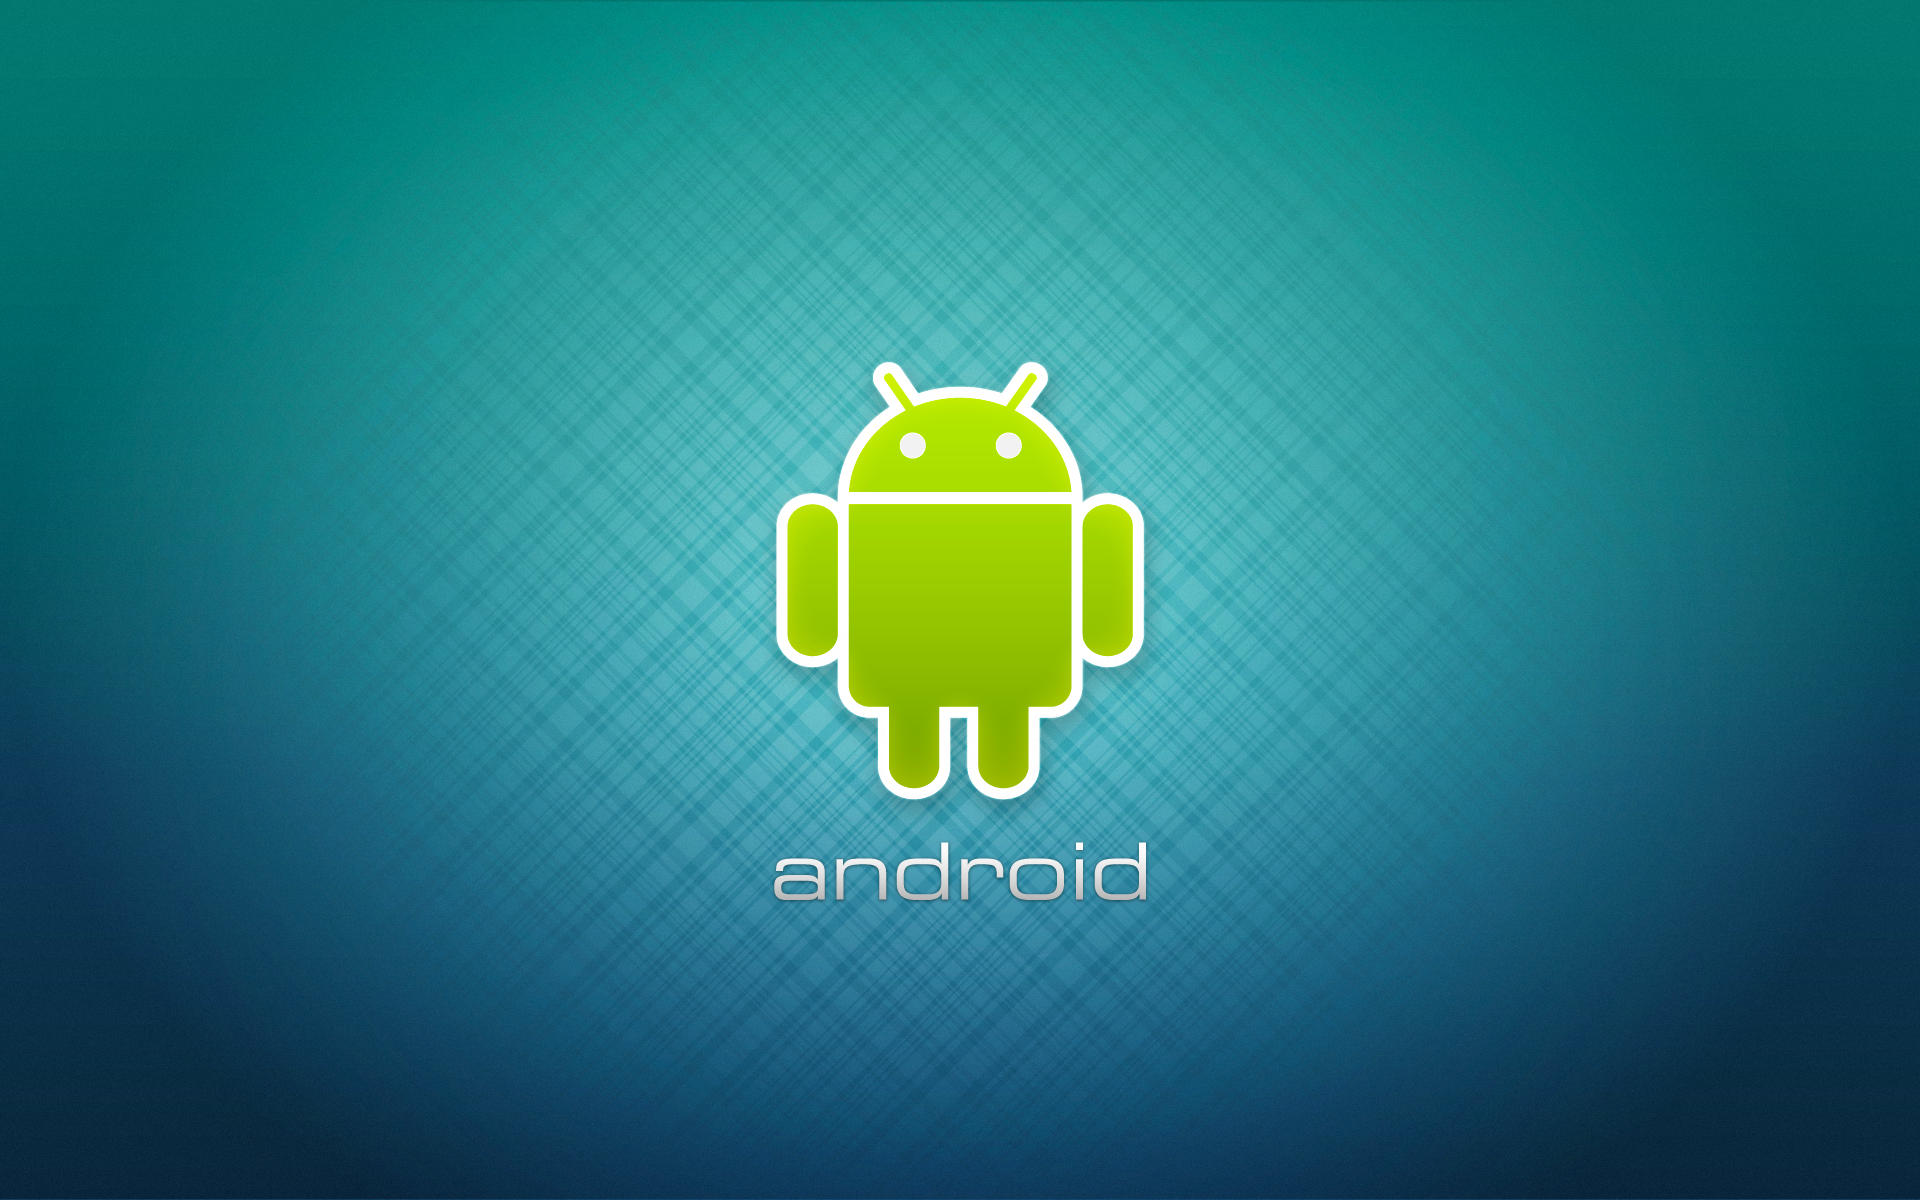 Download Android wallpaper | 1920x1200 | #22199